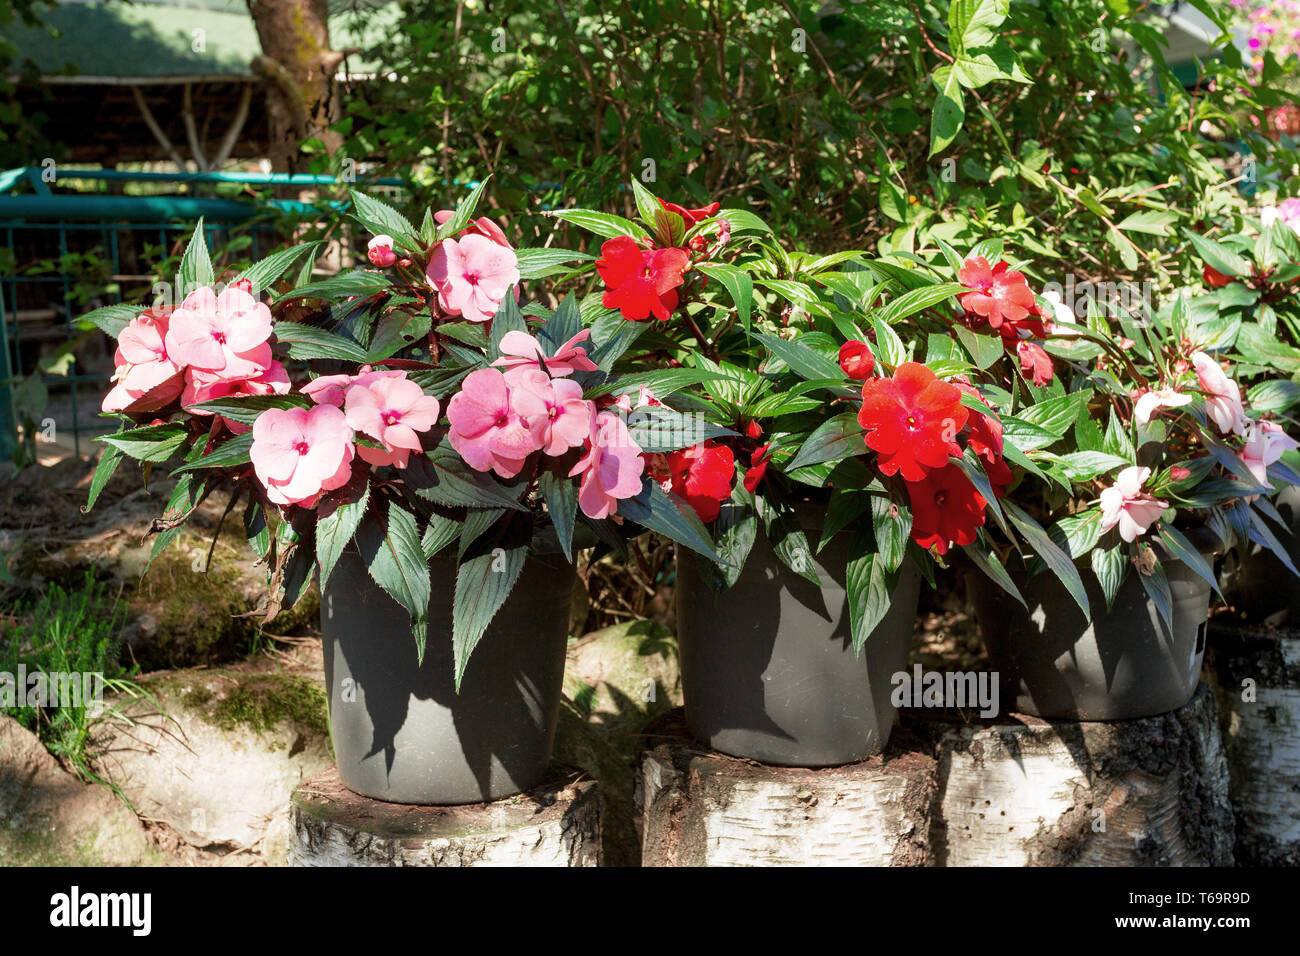 Red New Guinea impatiens flowers in pots Stock Photo